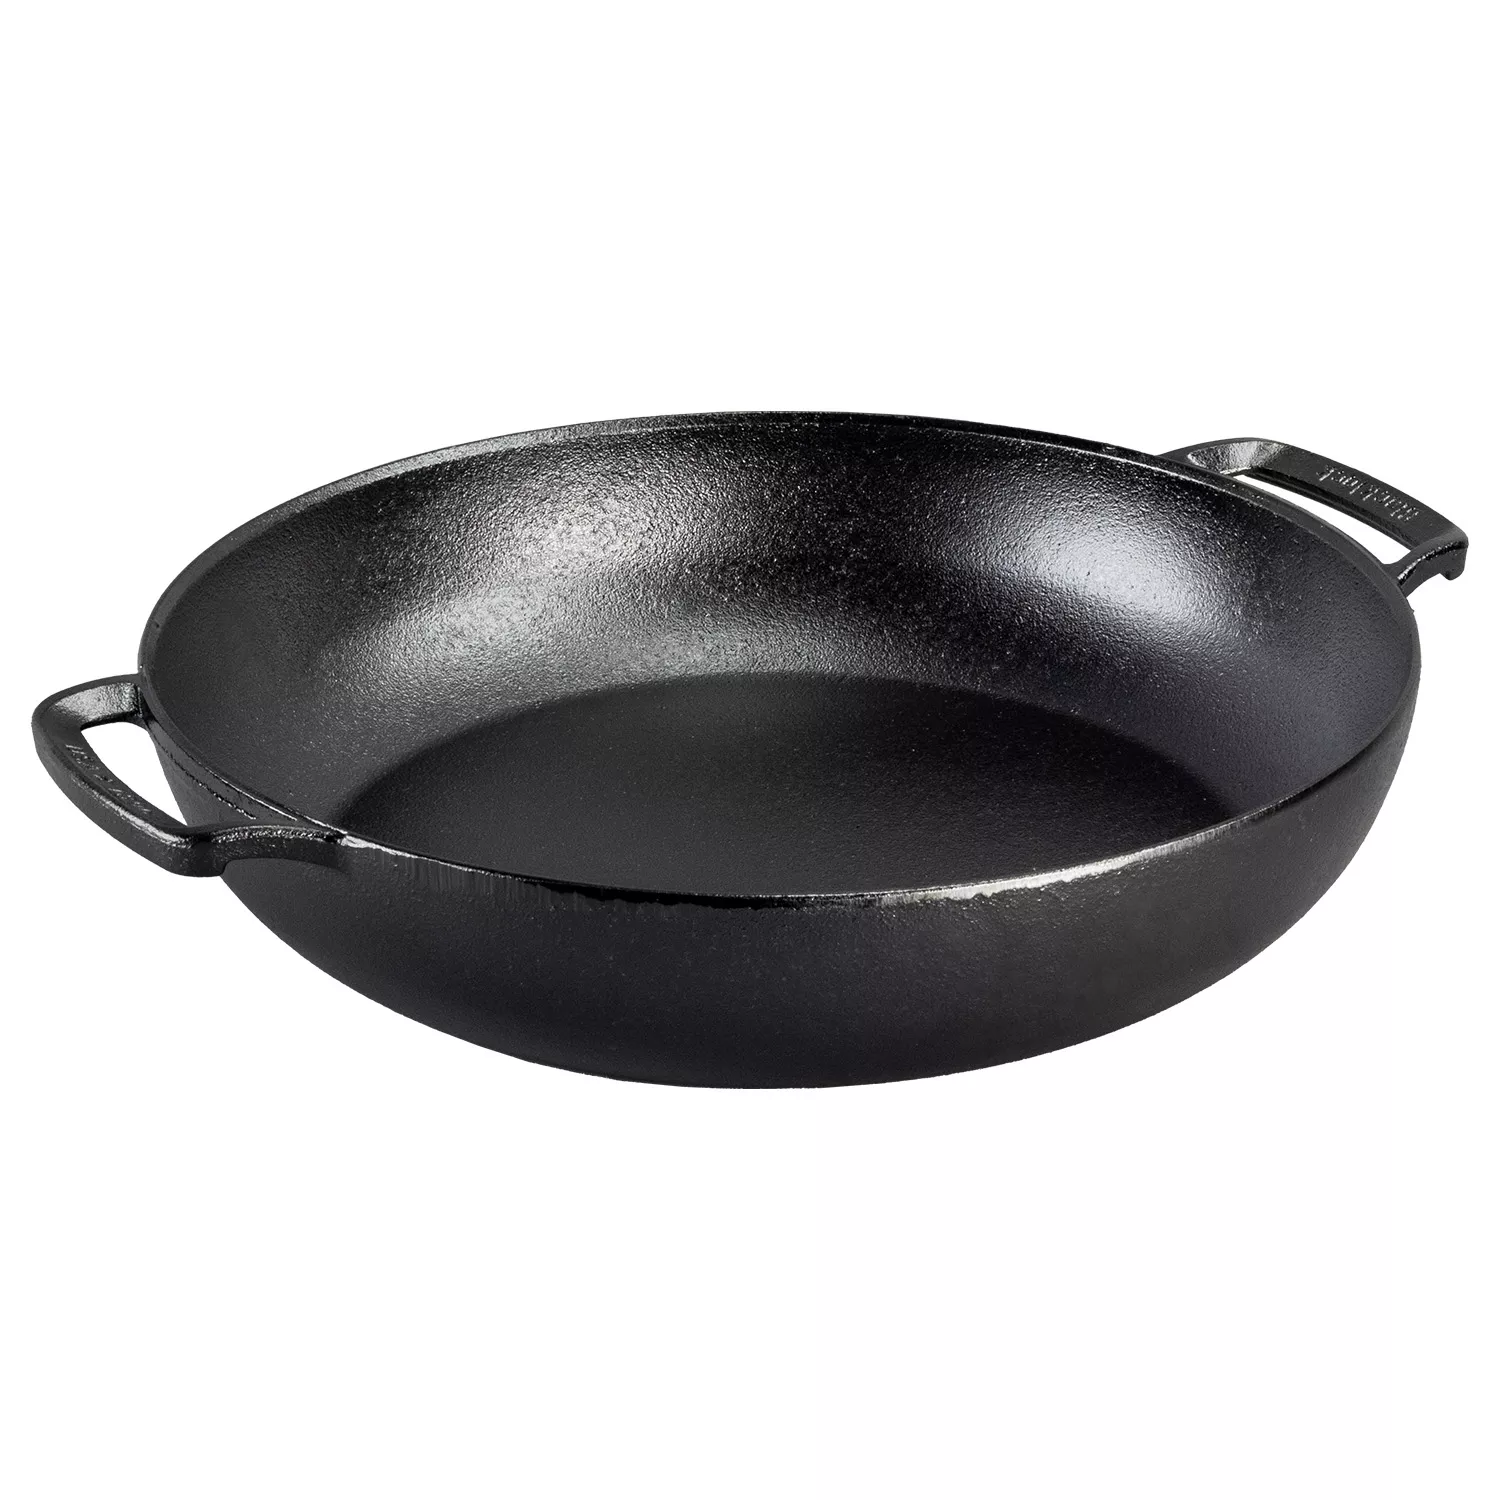 Lodge Cast Iron - For a limited time, get 20% off Blacklock